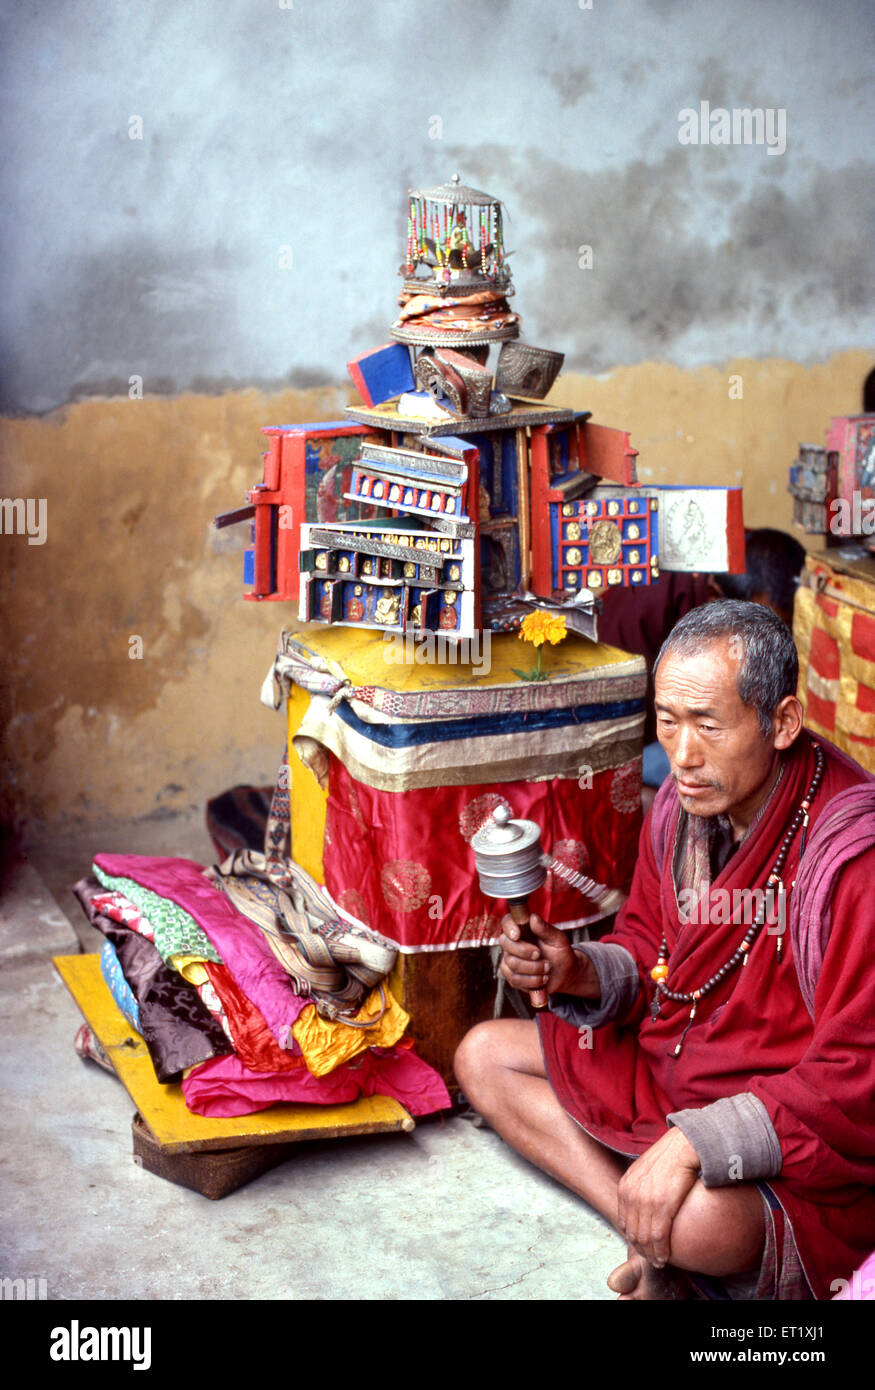 Bhutanese priest with mobile temple of Buddha rotates prayer wheel in Bhutan ; Asia ; old vintage 1900s picture Stock Photo